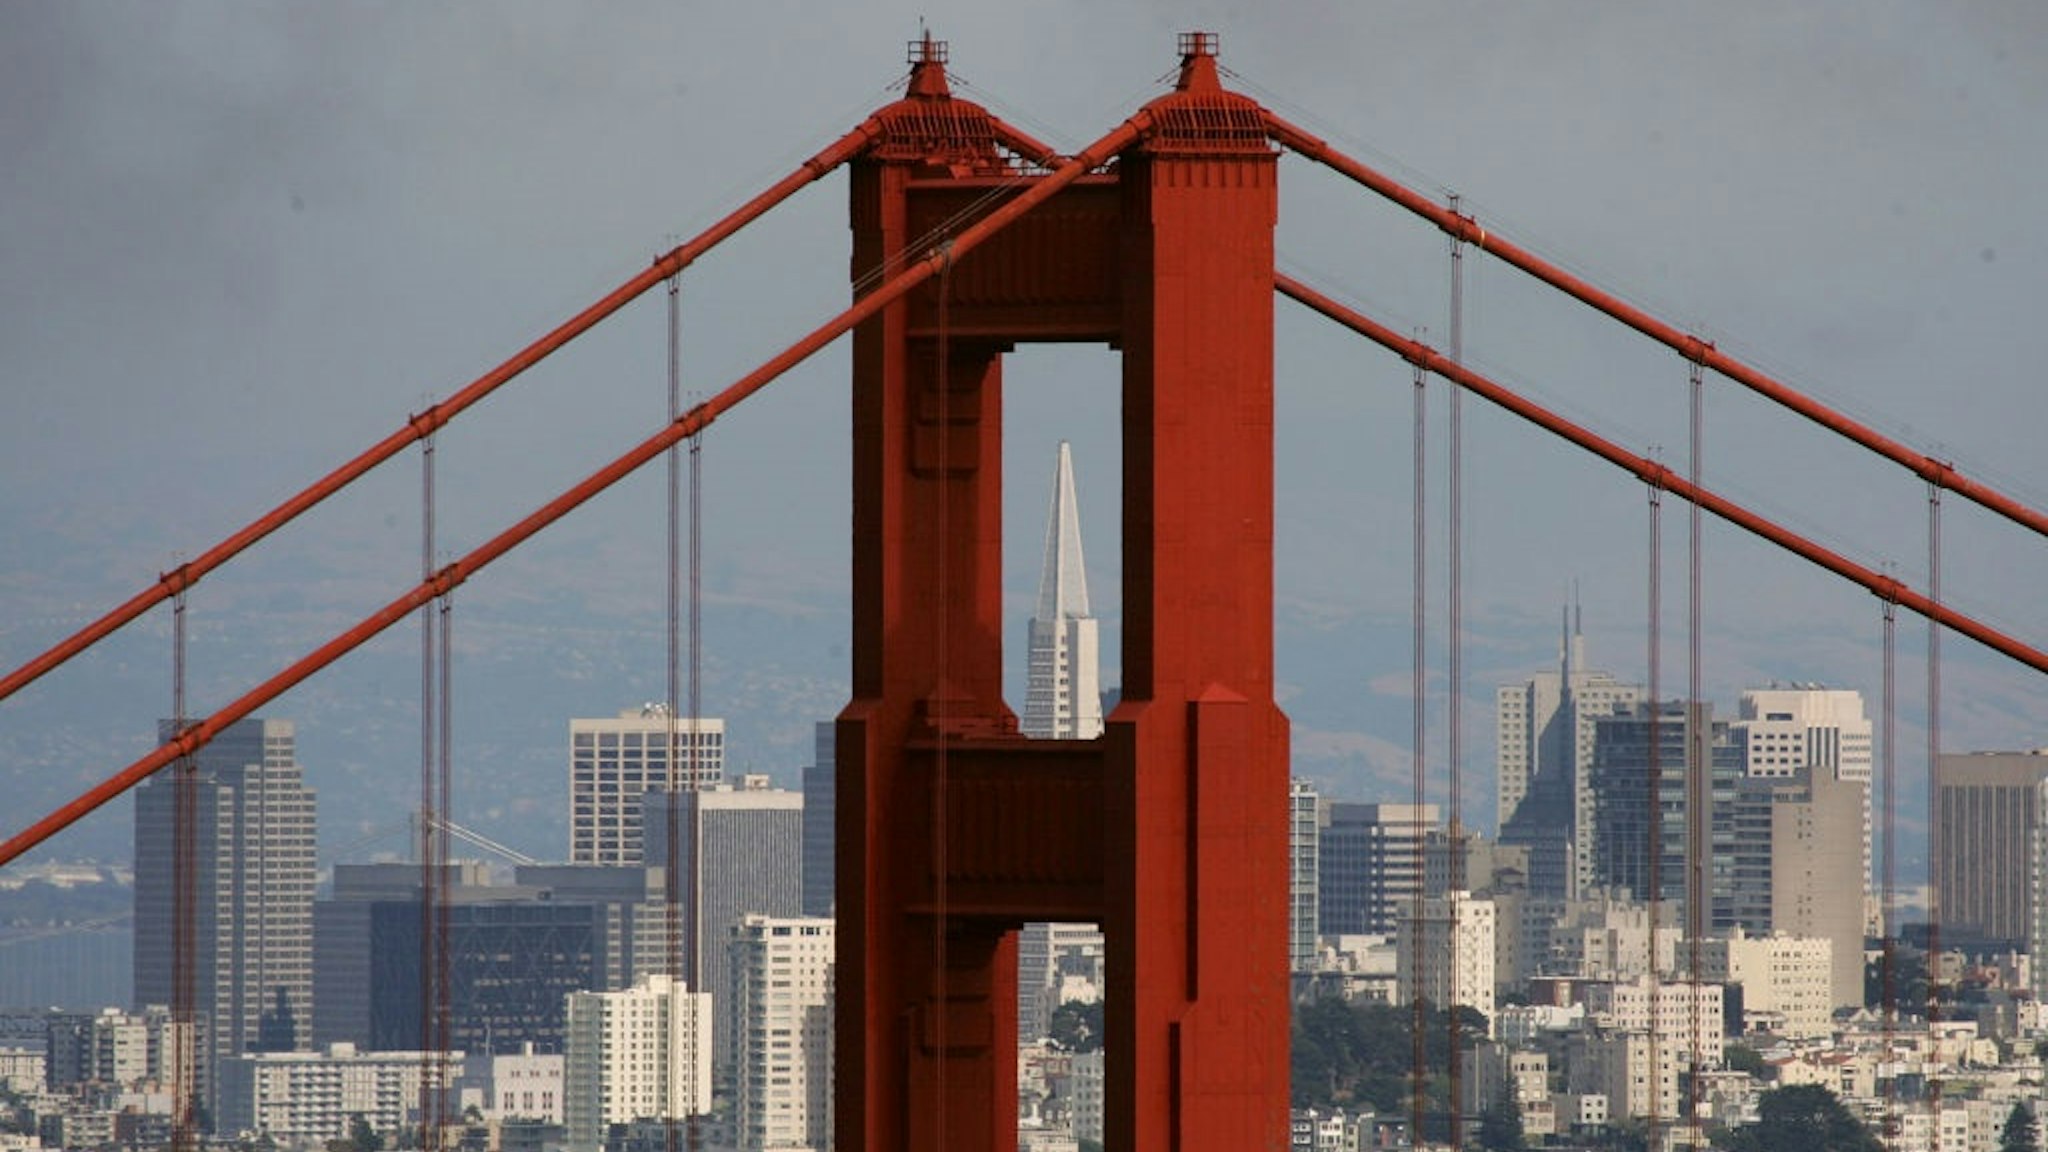 SAUSALITO, CA - JUNE 20: The Transamerica Pyramid building is seen through the north tower of the Golden Gate Bridge June 20, 2007 as seen from Sausalito, California.